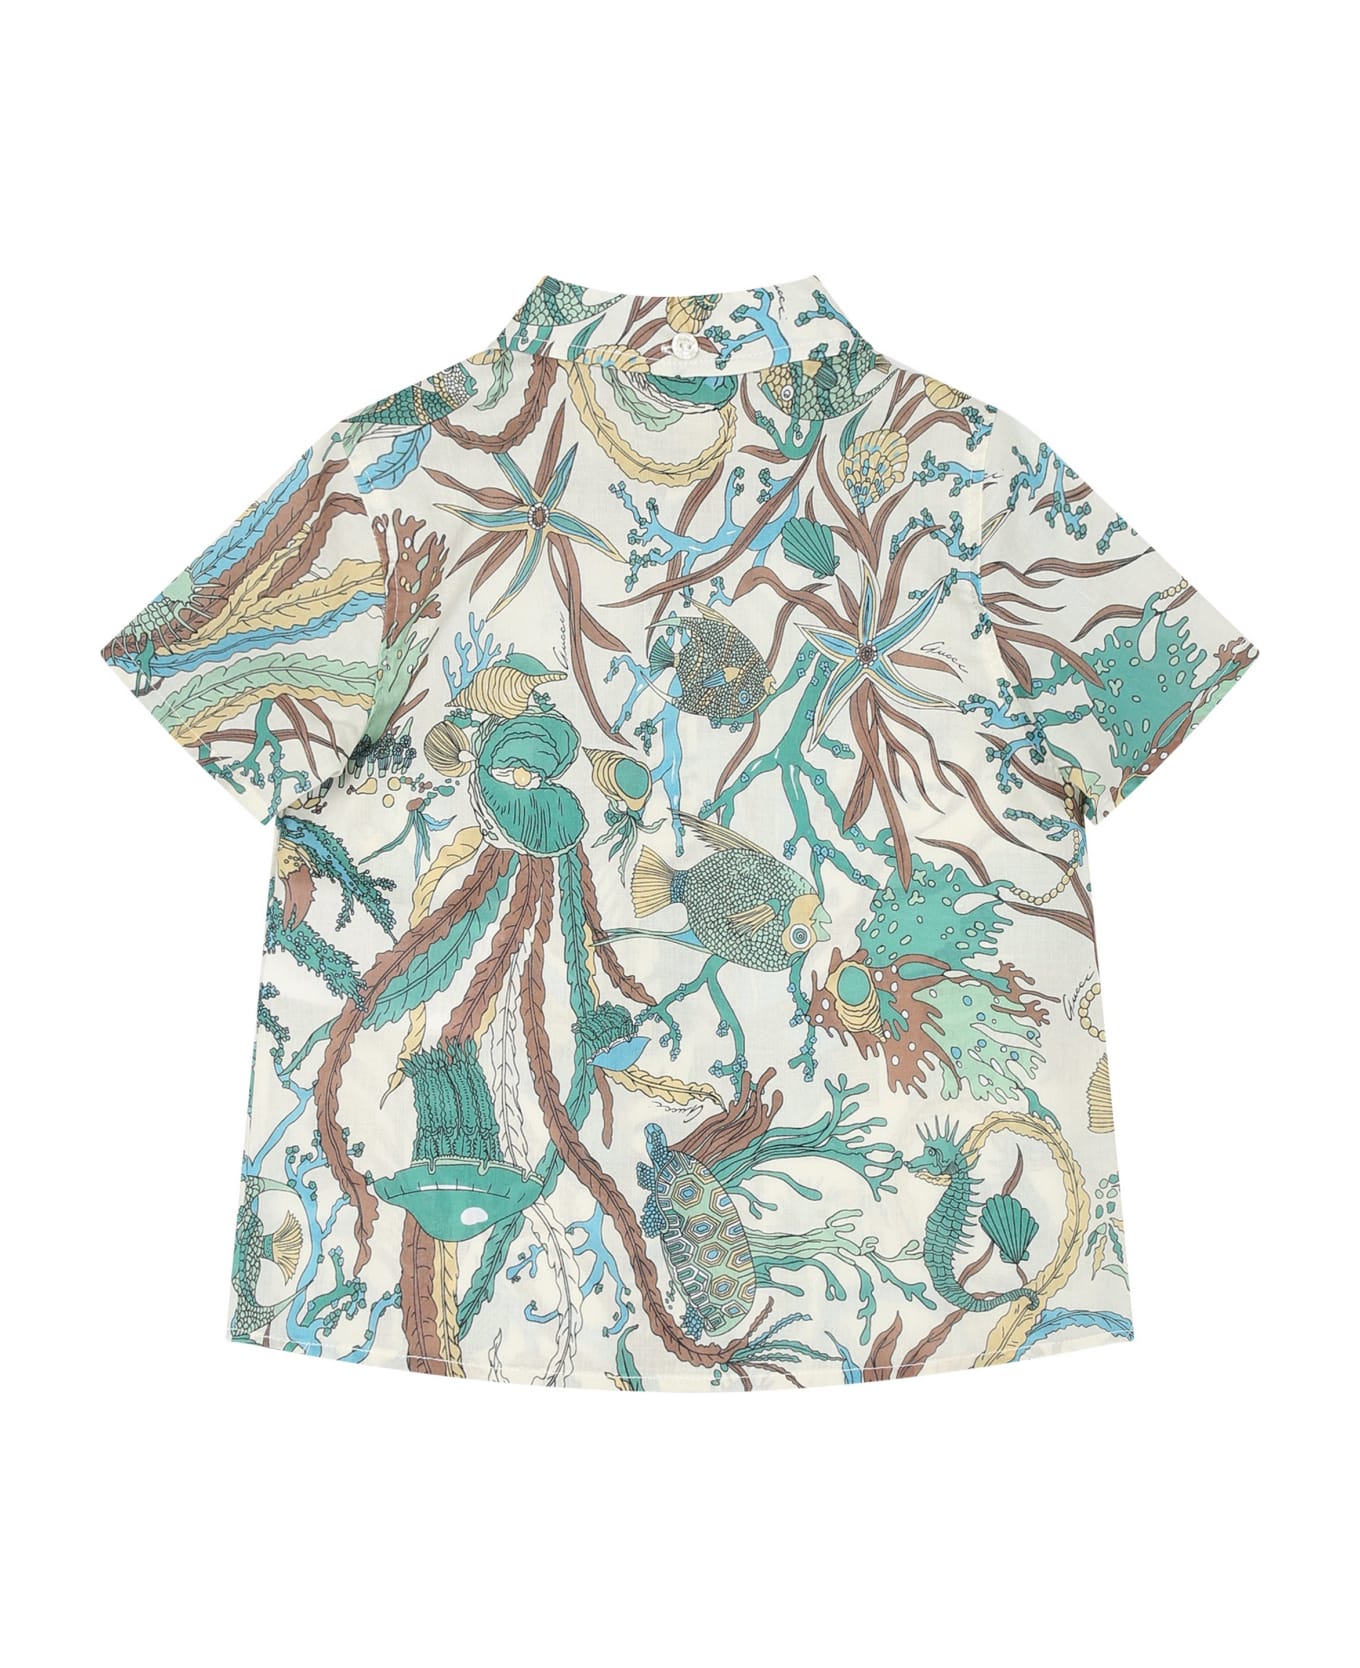 Gucci Ivory Shirt For Baby Boy With Marine Print - Multicolor シャツ